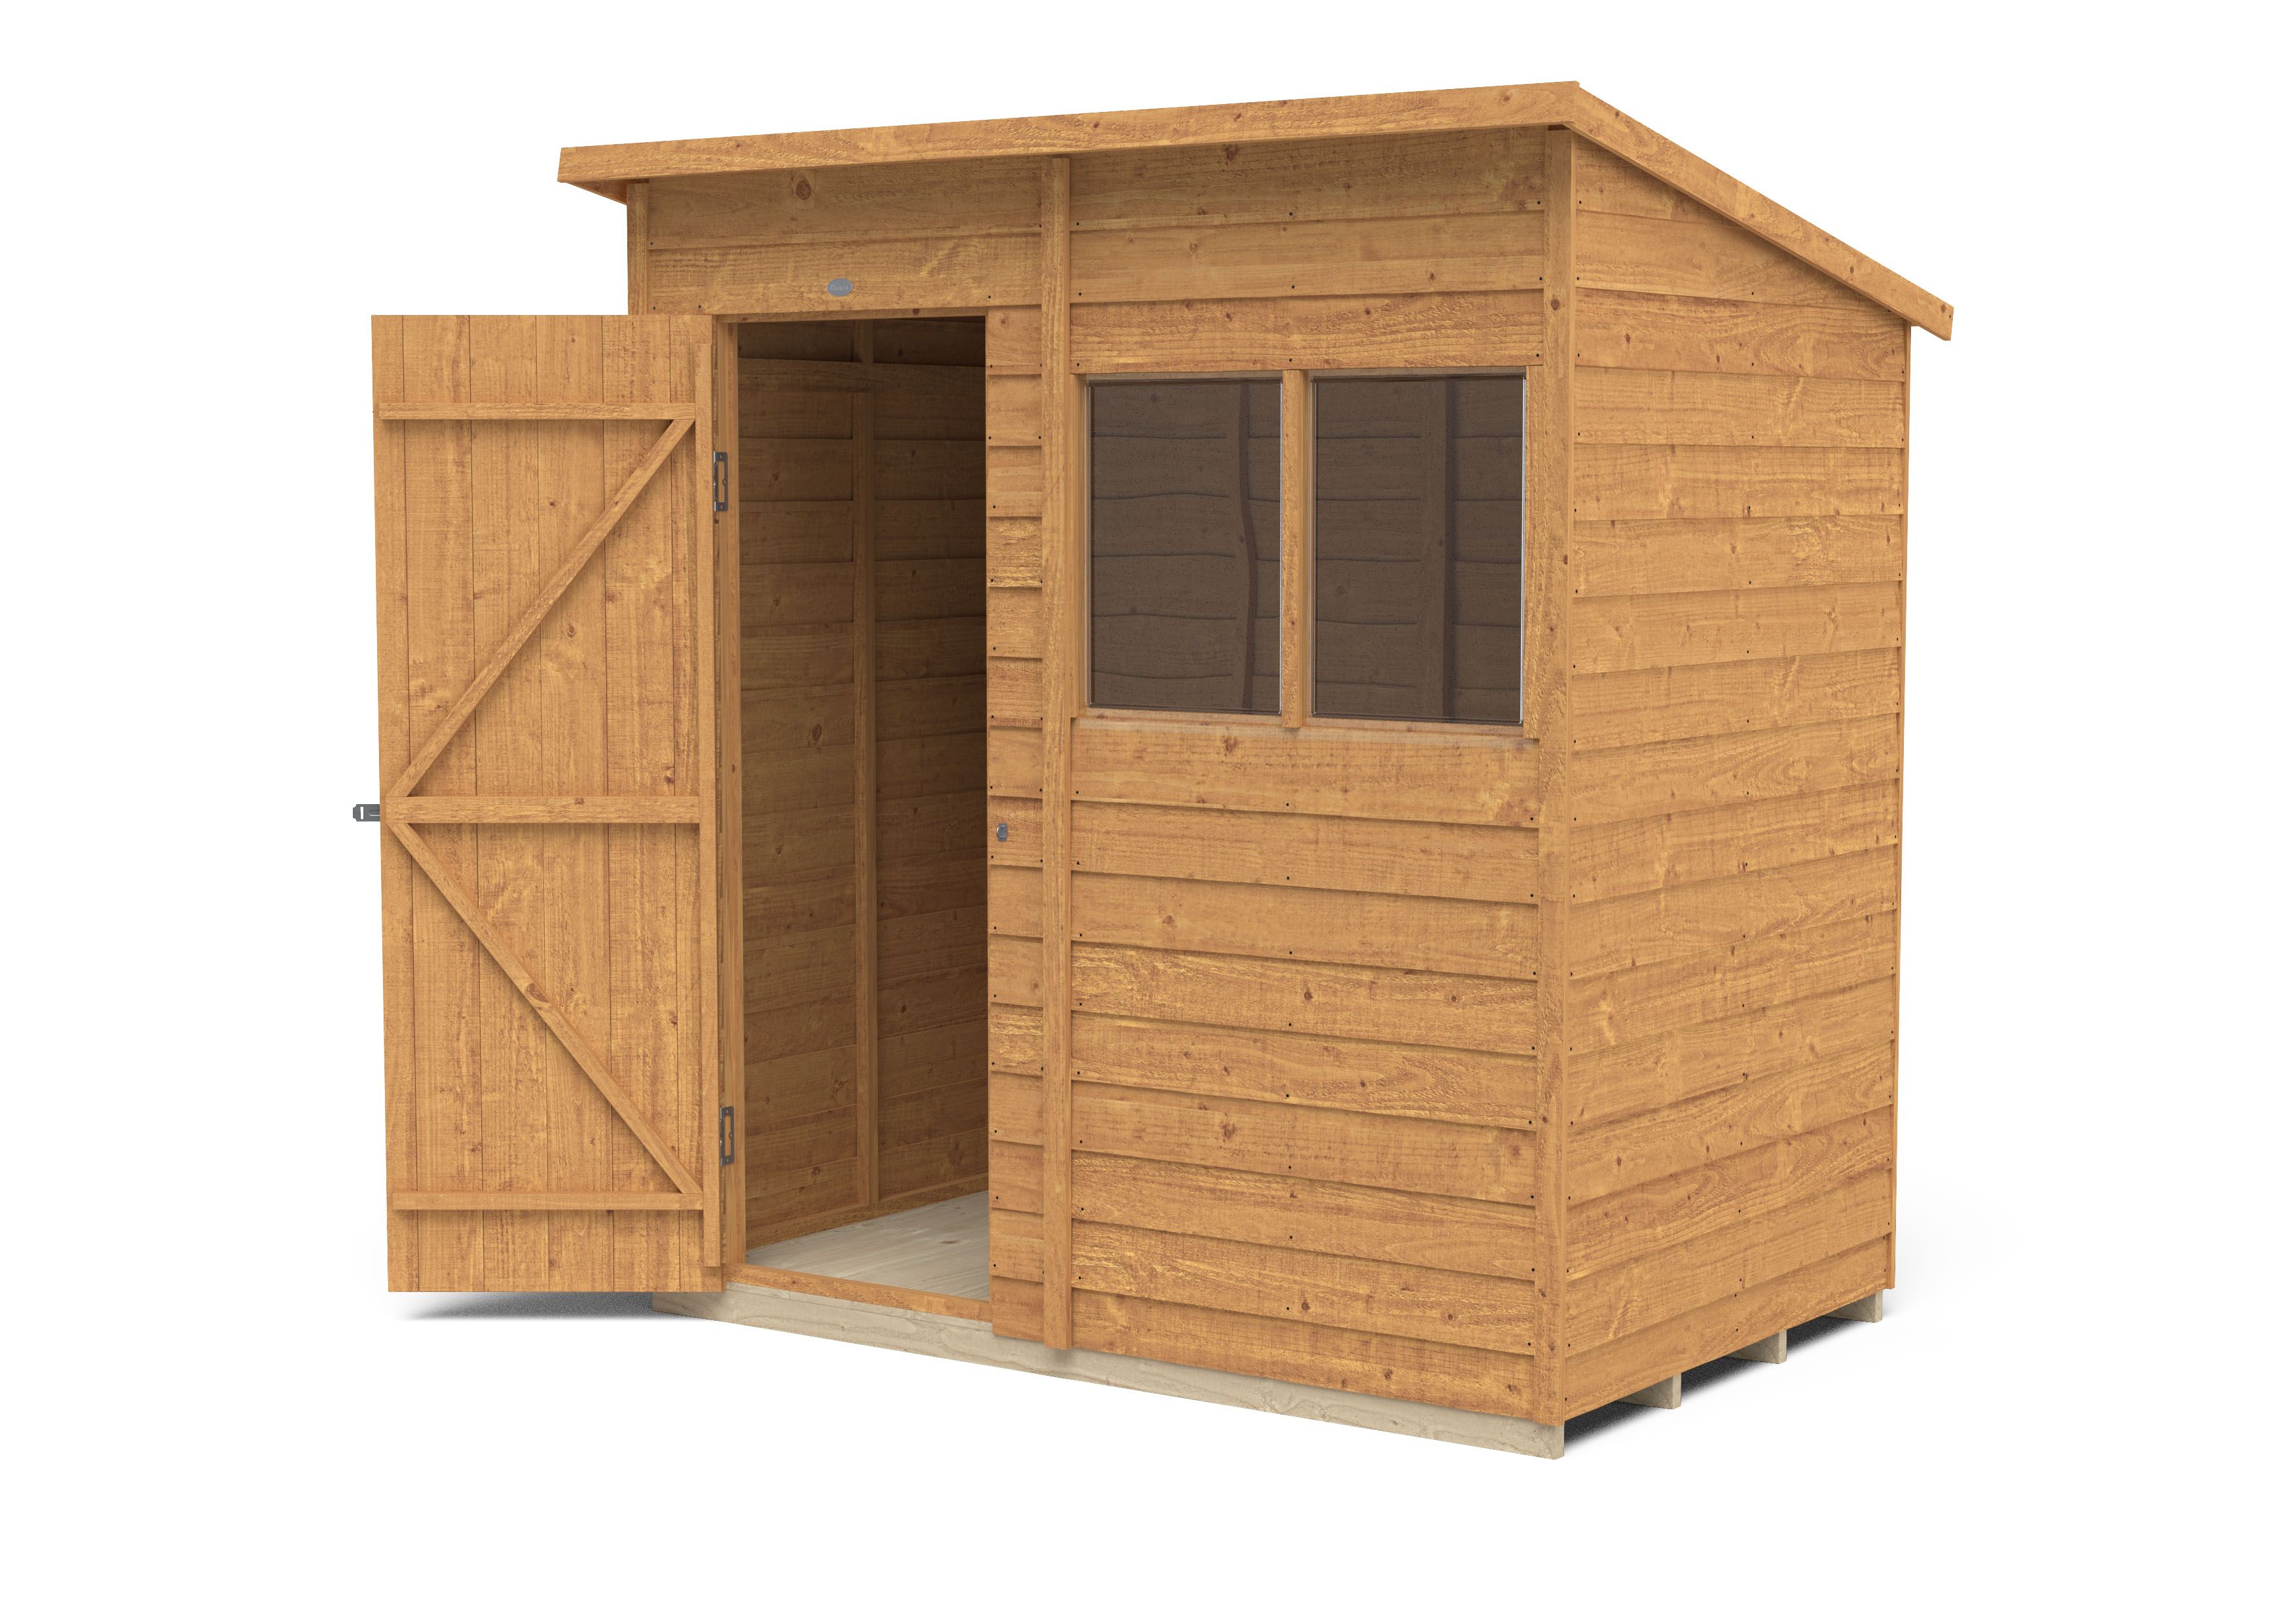 Forest Garden Overlap 6x4 ft Pent Wooden Shed with floor & 2 windows (Base included) - Assembly service included